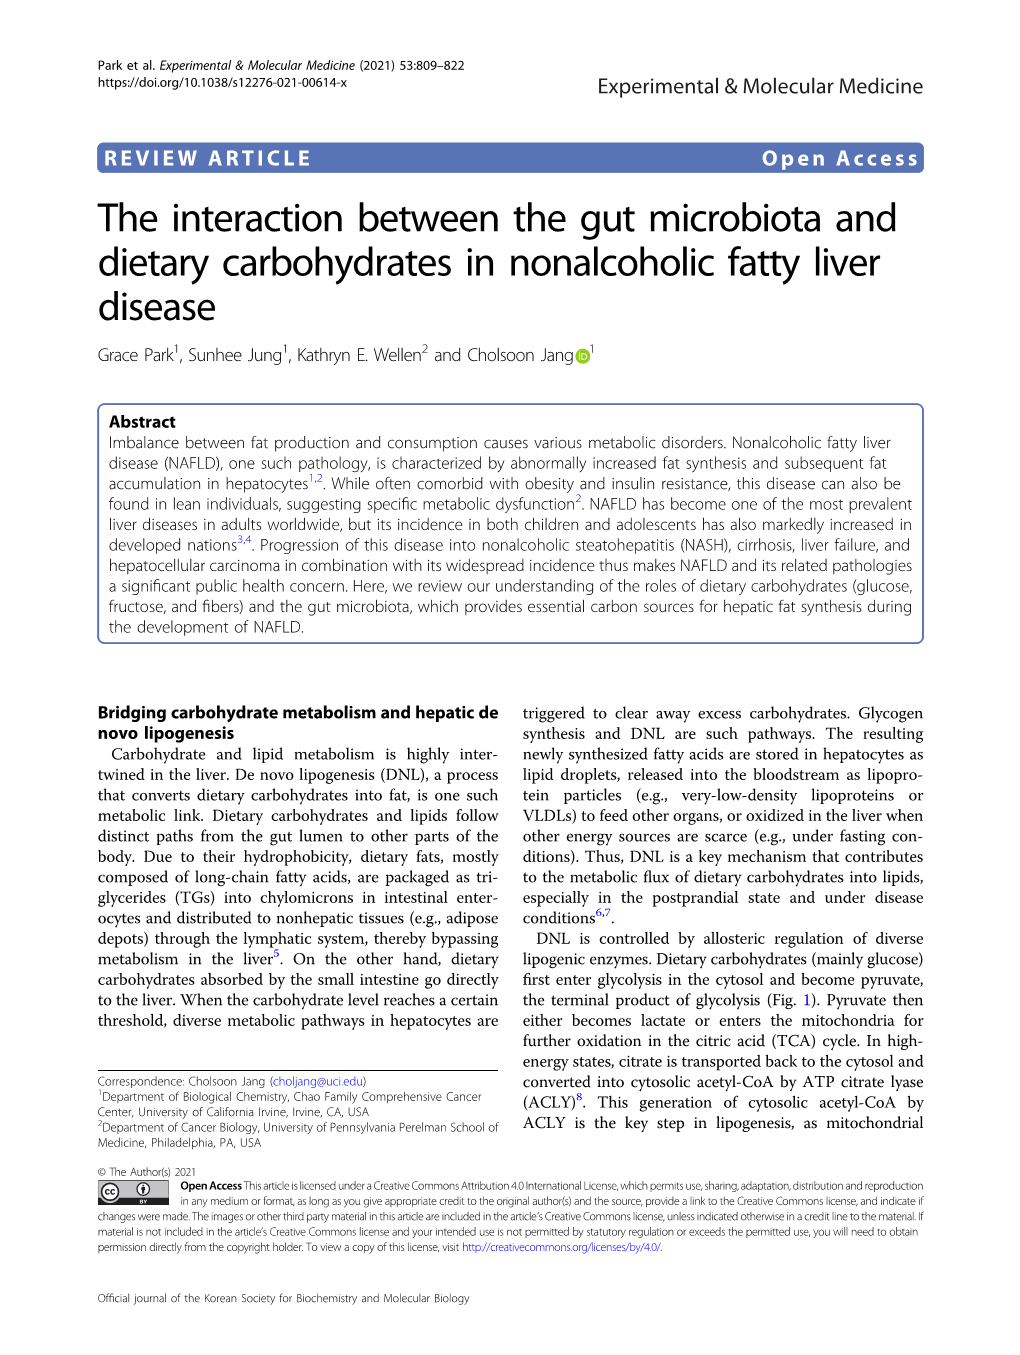 The Interaction Between the Gut Microbiota and Dietary Carbohydrates in Nonalcoholic Fatty Liver Disease Grace Park1,Sunheejung1, Kathryn E